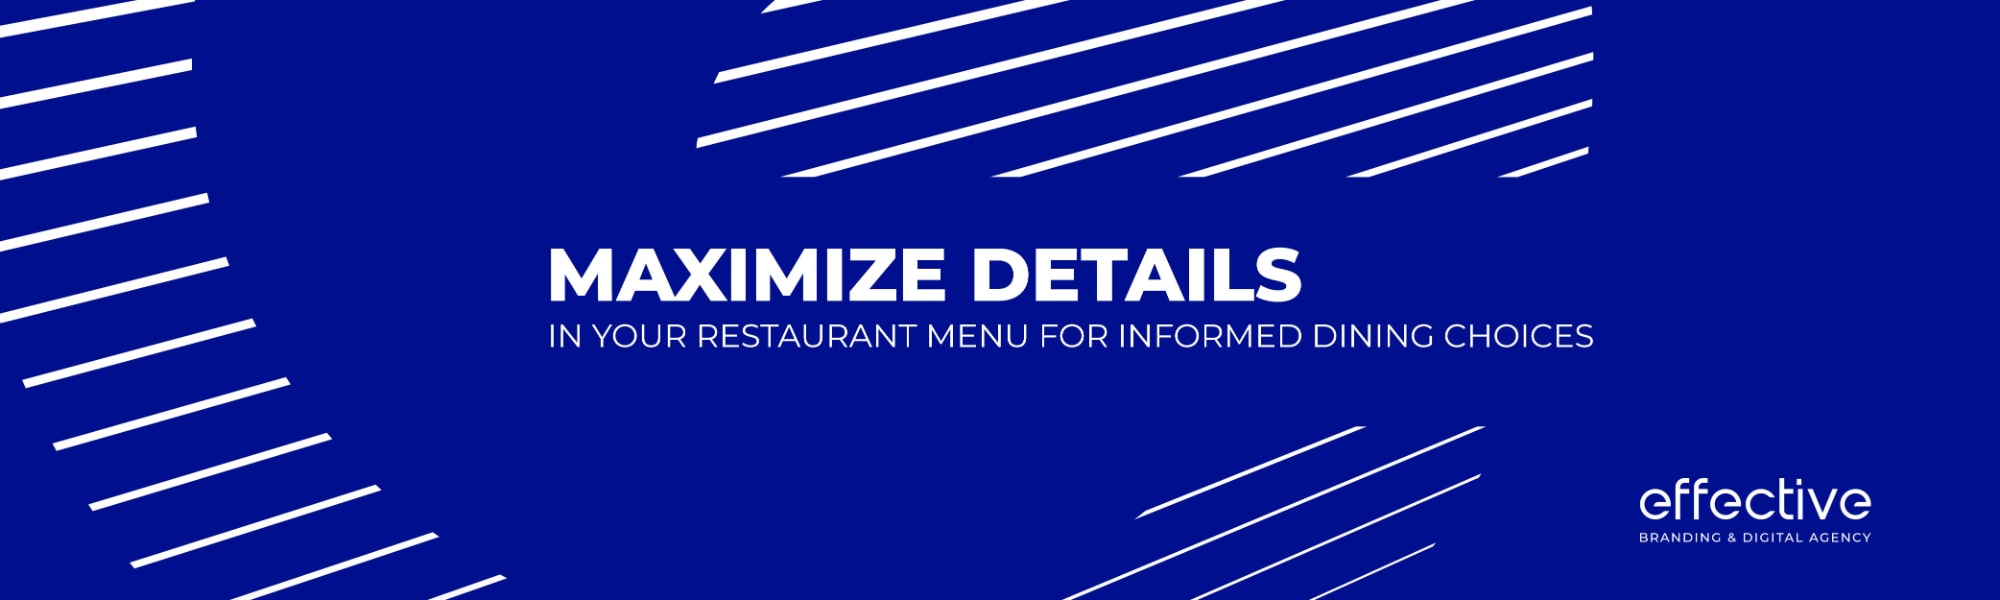 Maximize Details in Your Restaurant Menu for Informed Dining Choices